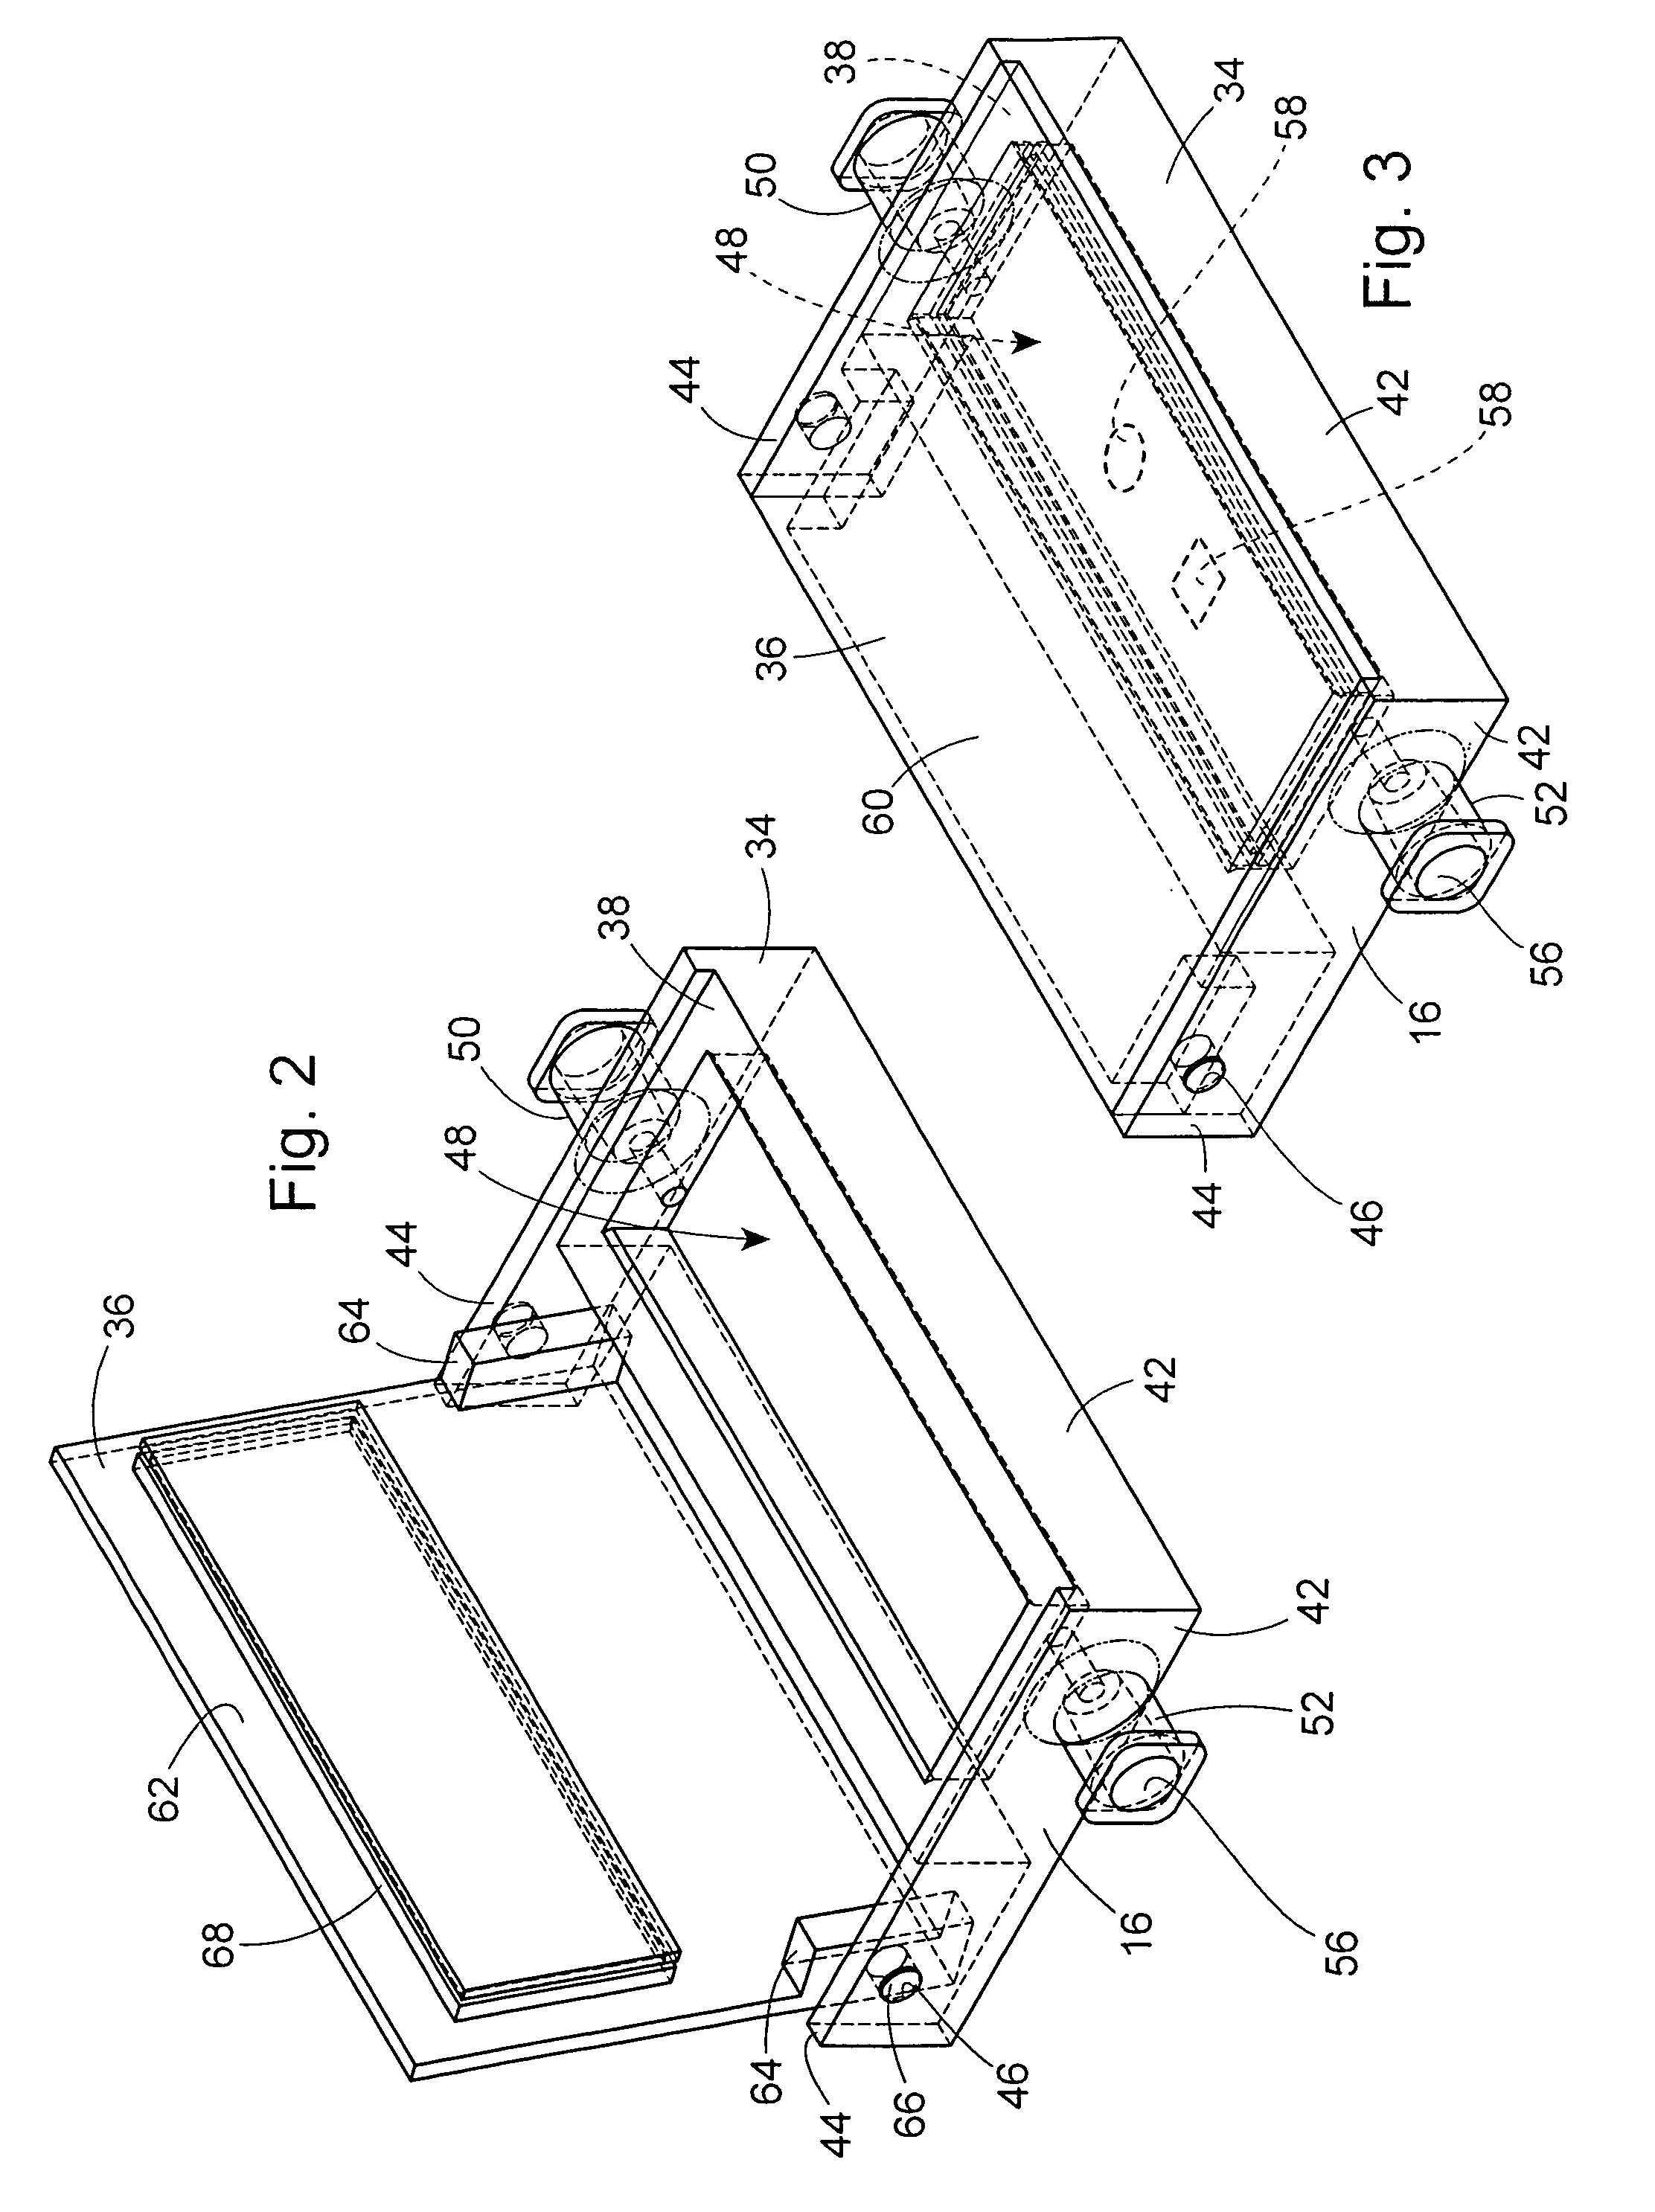 Apparatus and method for reconstituting a pharmaceutical and preparing the reconstituted pharmaceutical for transient application